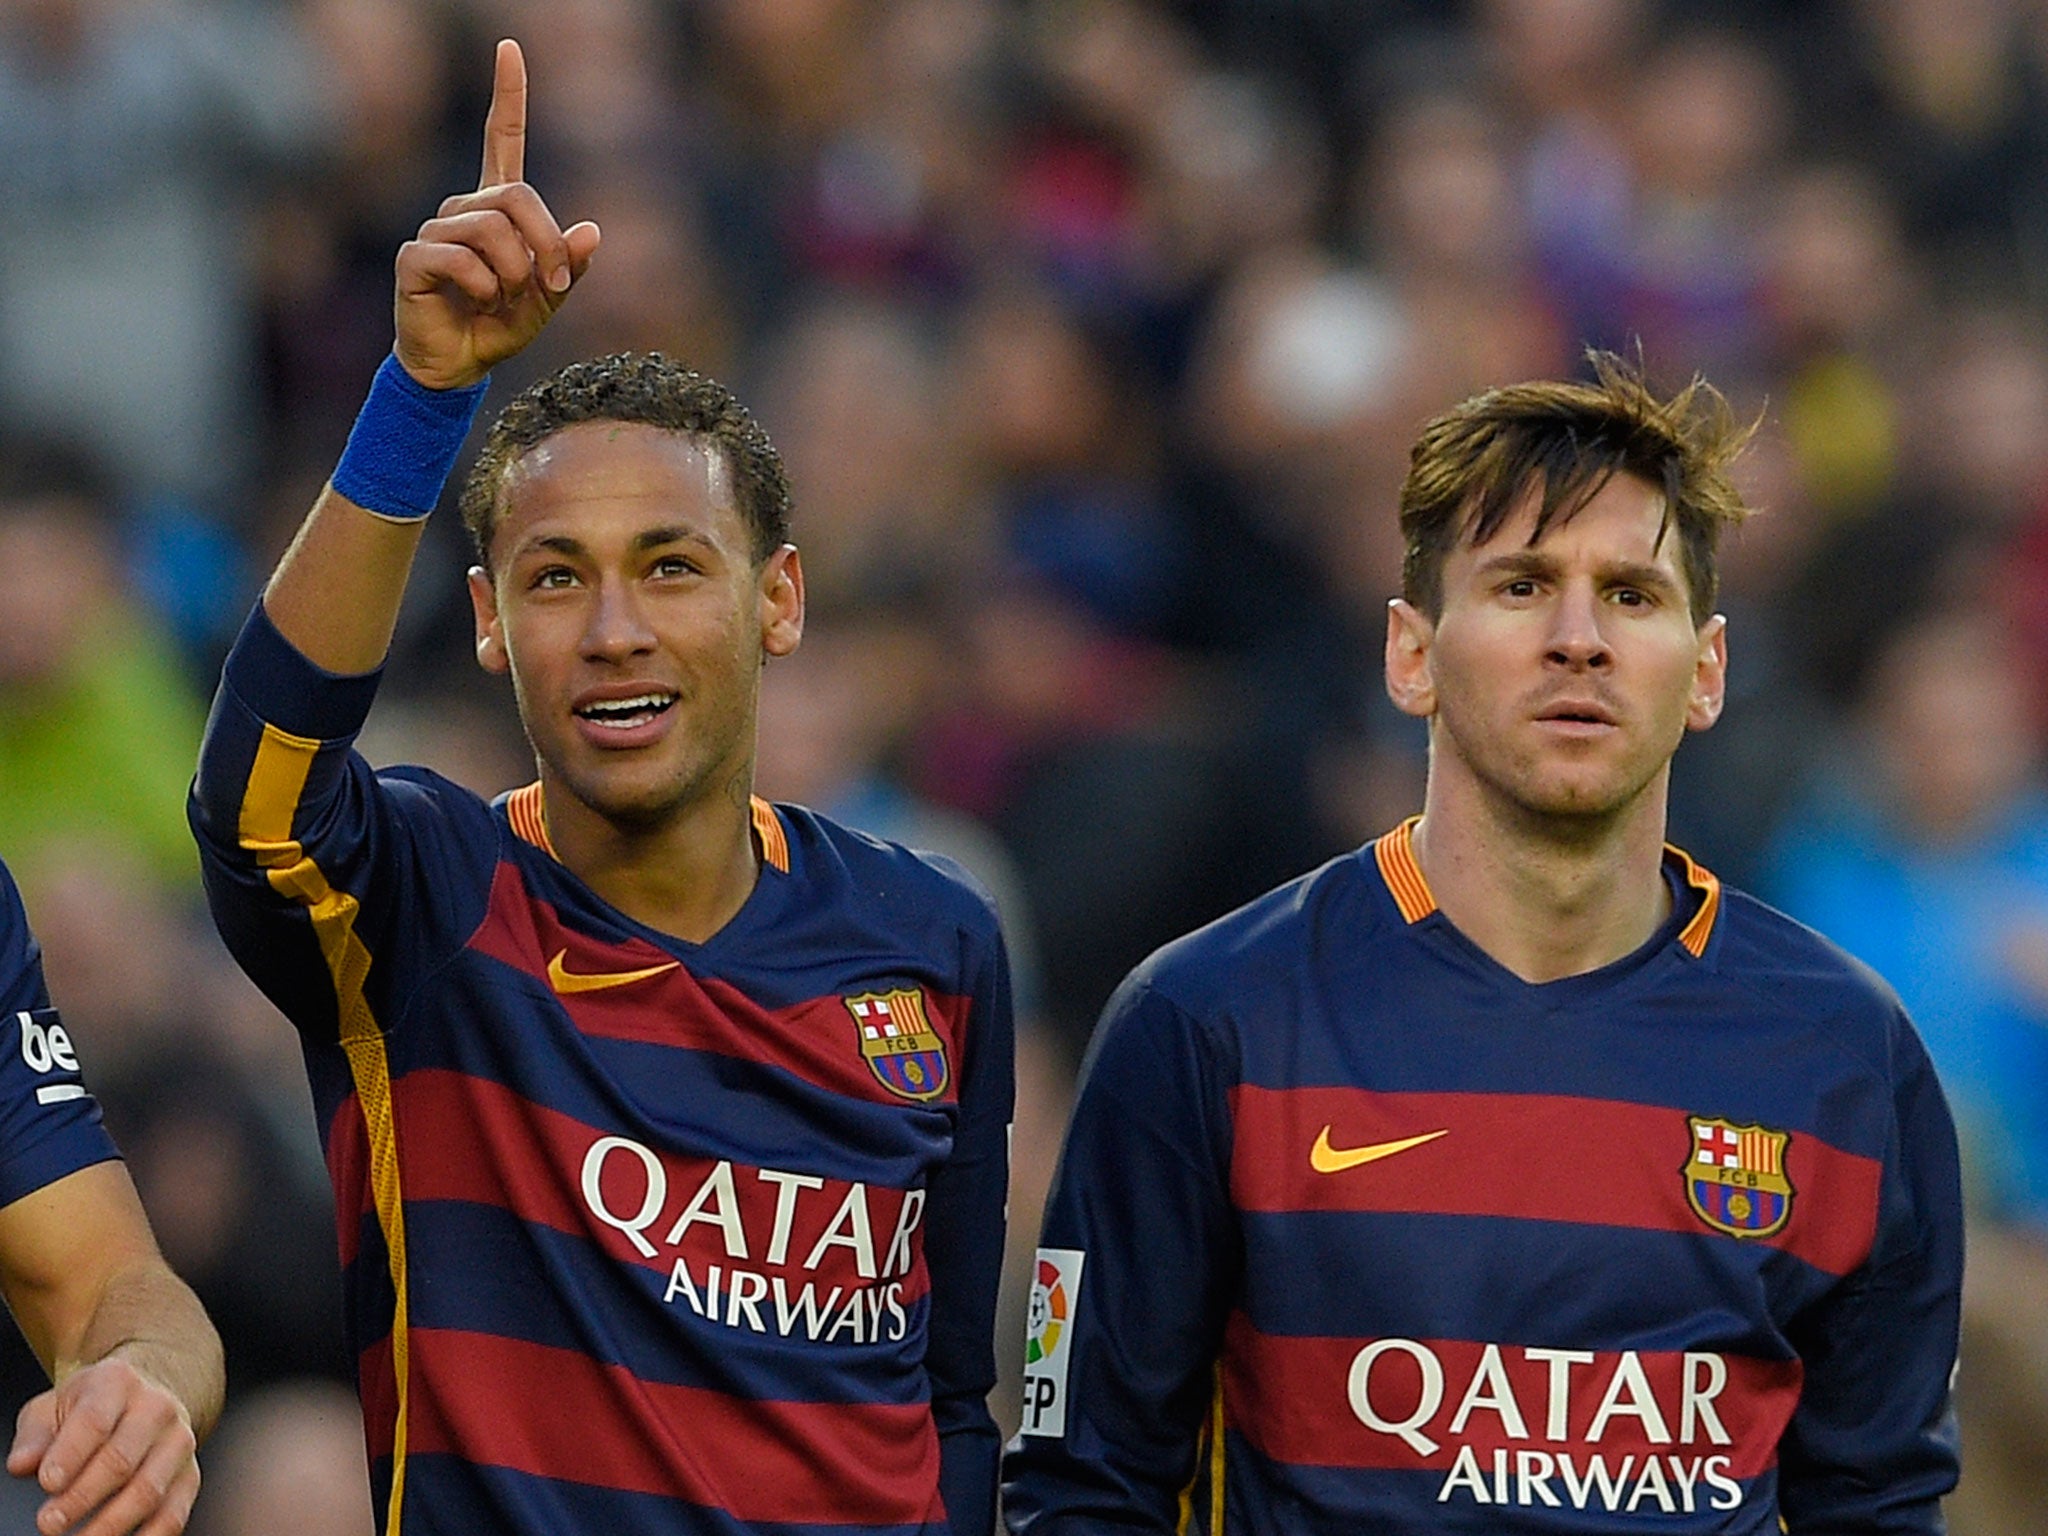 Premier League Giant Wants To Sign Both Lionel Messi And Neymar